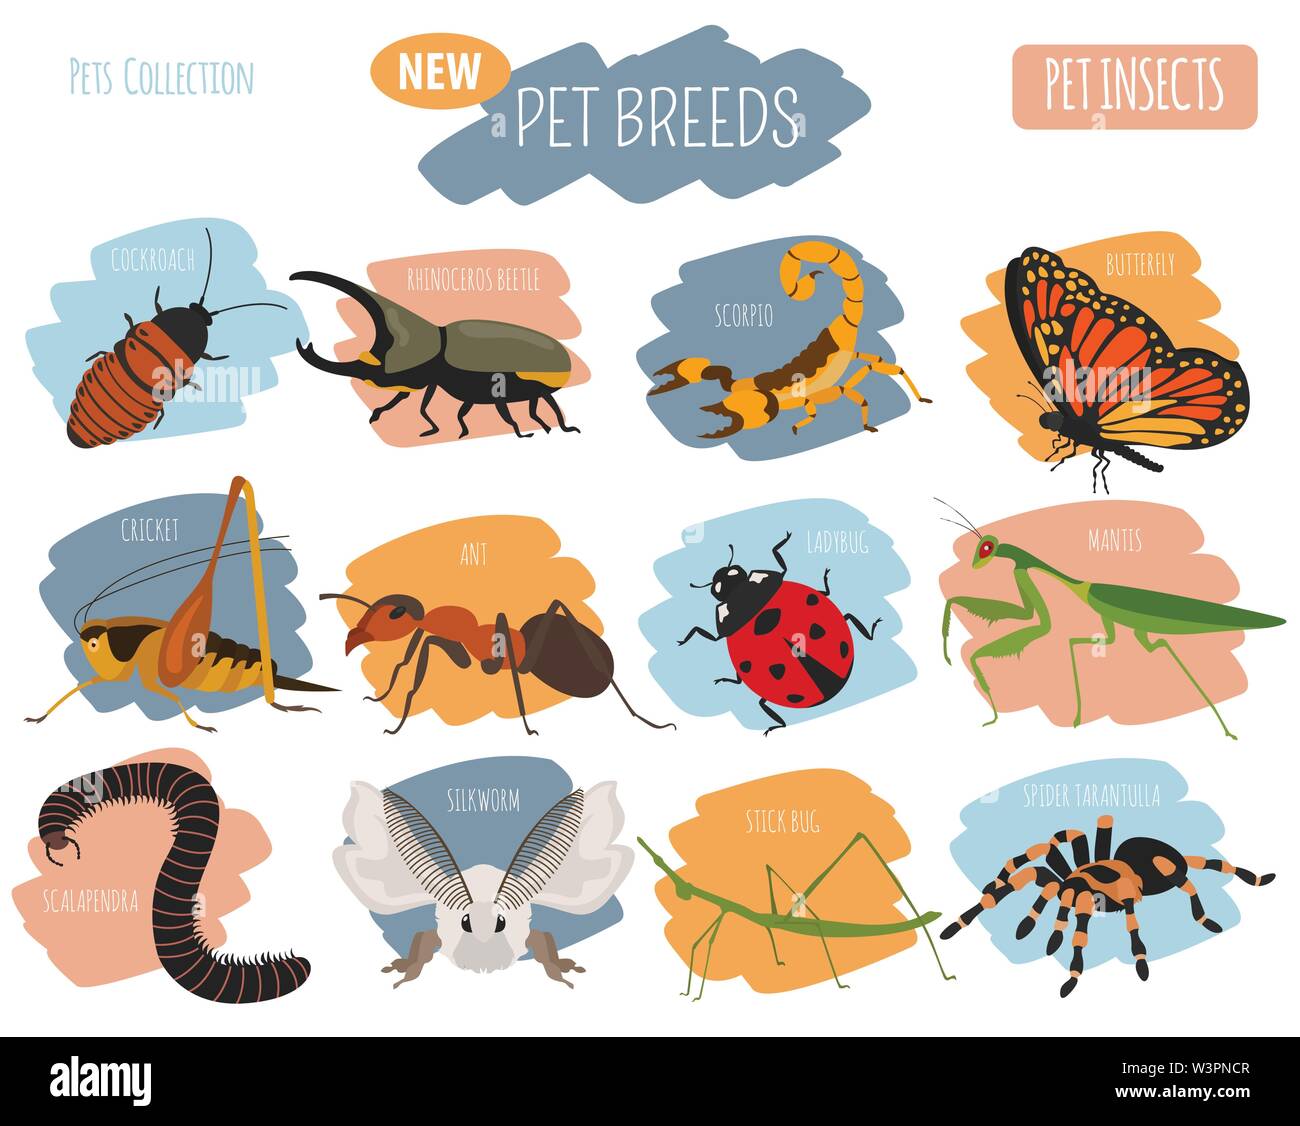 Pet insects breeds icon set flat style isolated on white. House keeping bugs, beetles, sticks, spiders and other collection. Create own infographic ab Stock Vector